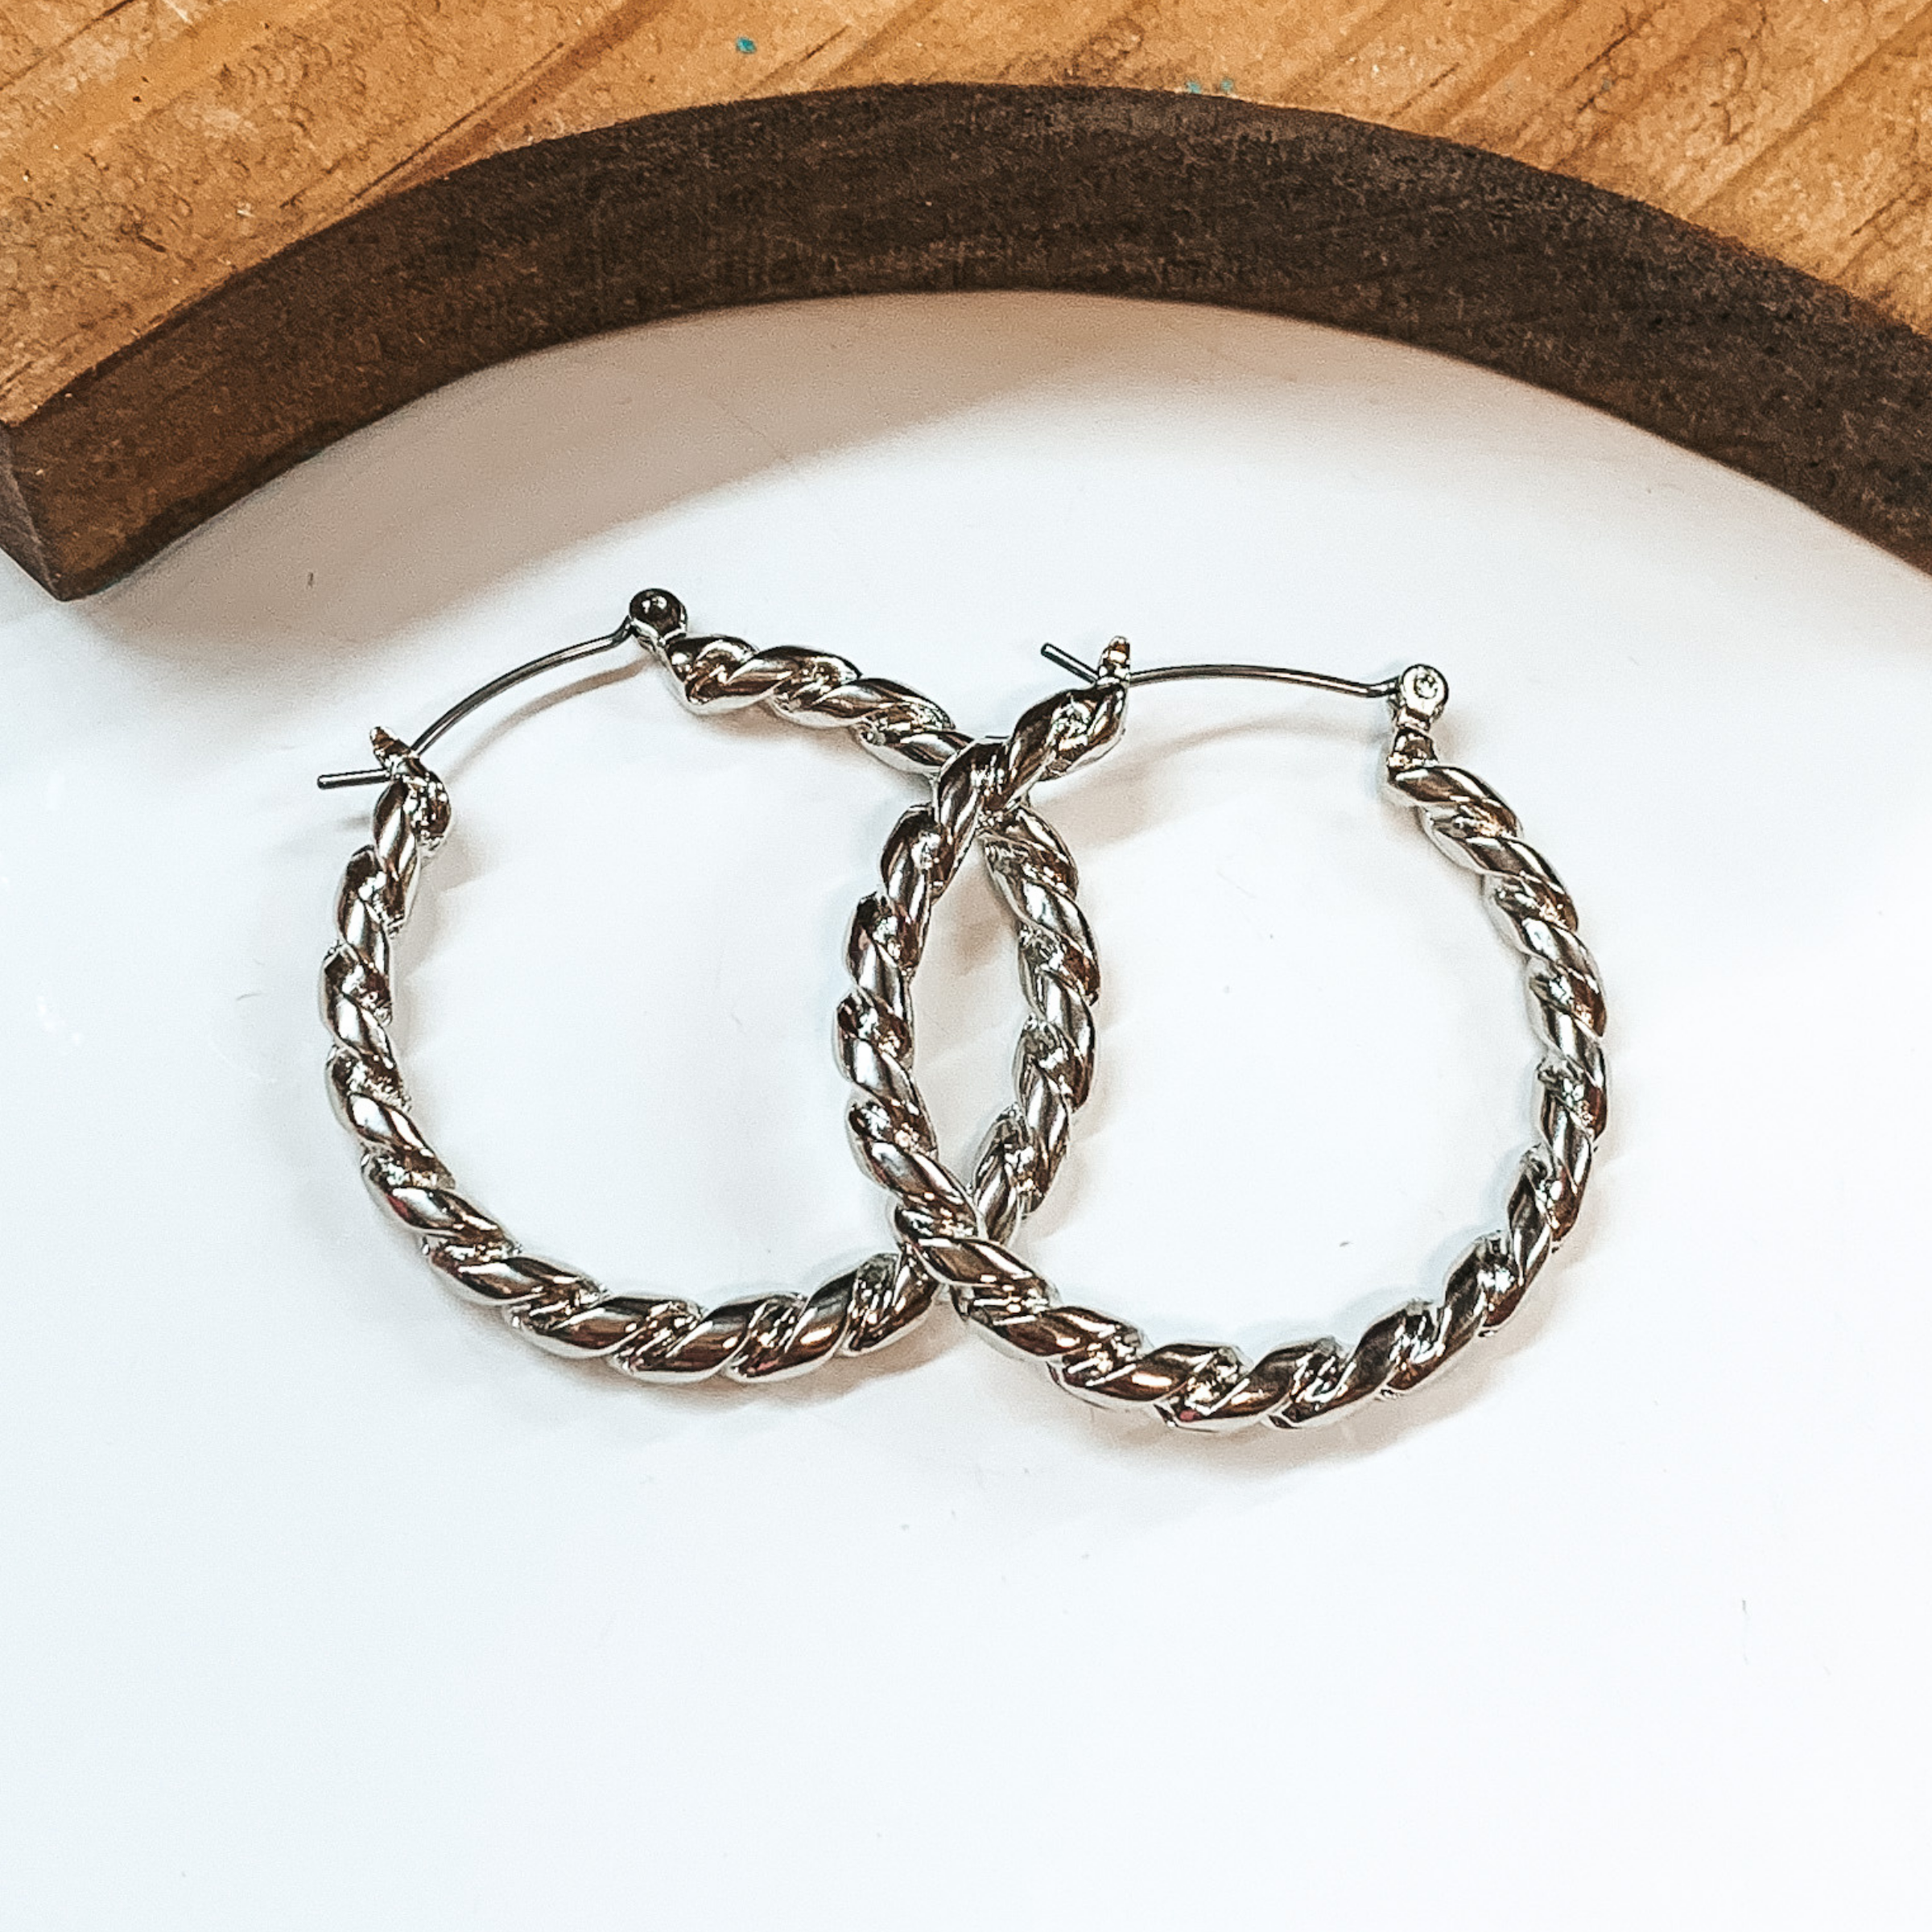 Silver hoop earrings with twisted rope texture. Taken on a white background with a brown block in the back.